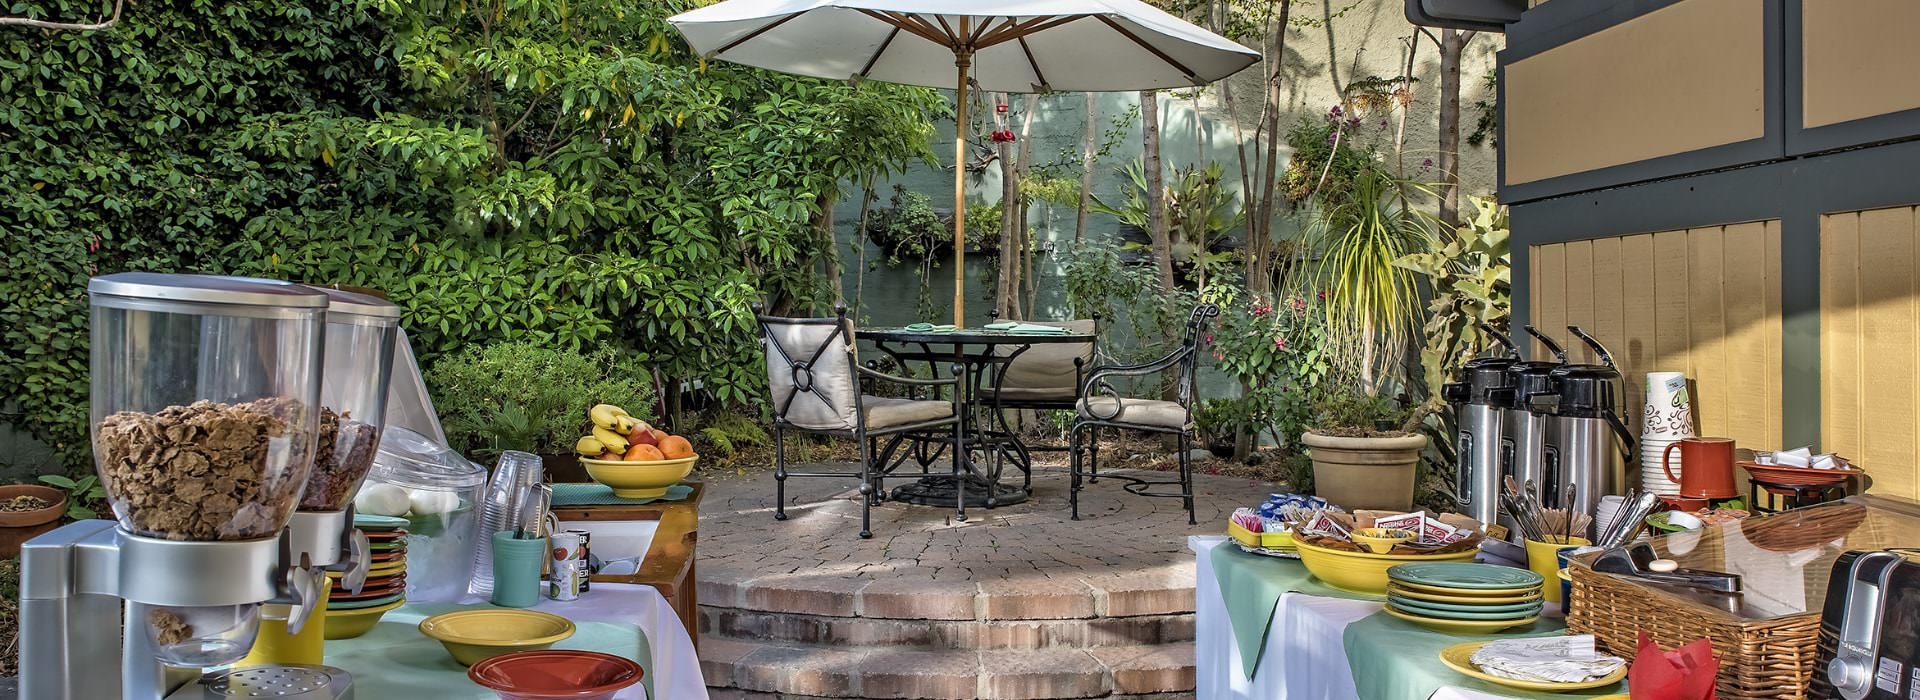 Stone patio with metal patio tables, chairs with gray cushions, patio umbrella, lush gardens and tables set up with continental breakfast items